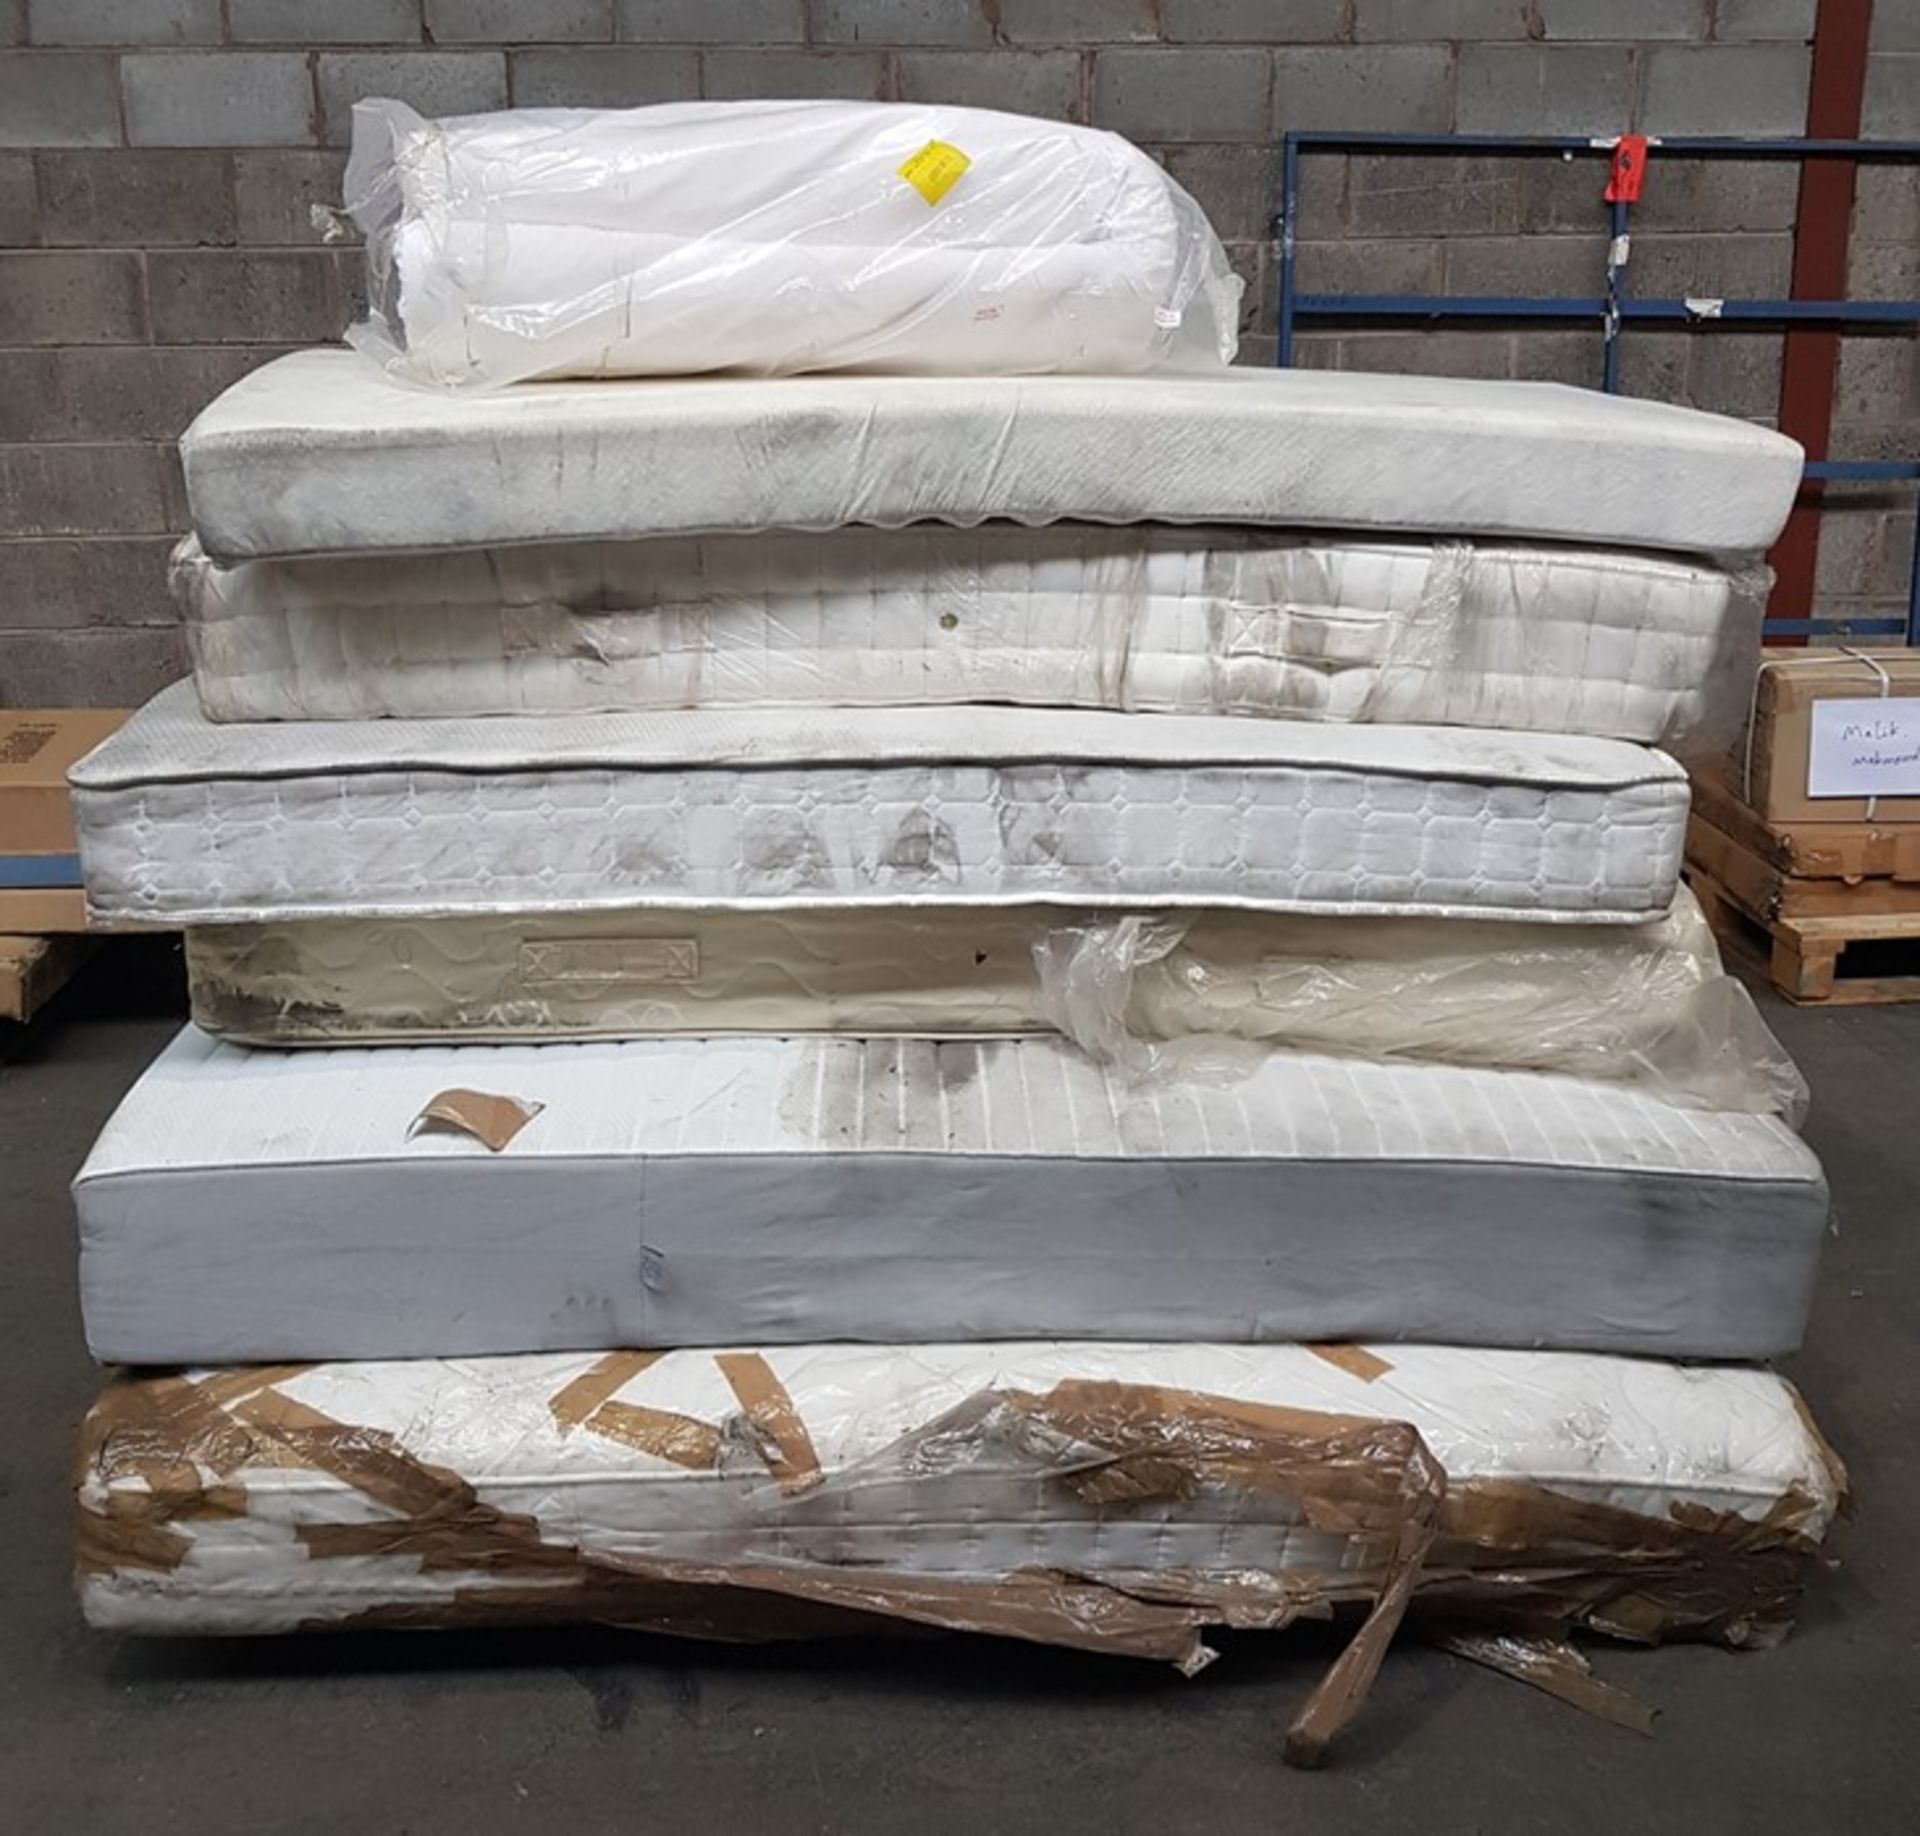 1 LOT TO CONTAIN GRADE C MATTRESSES IN VARIOUS SIZES FROM 3FT TO SUPERKING - ALL WILL NEED A CLEAN